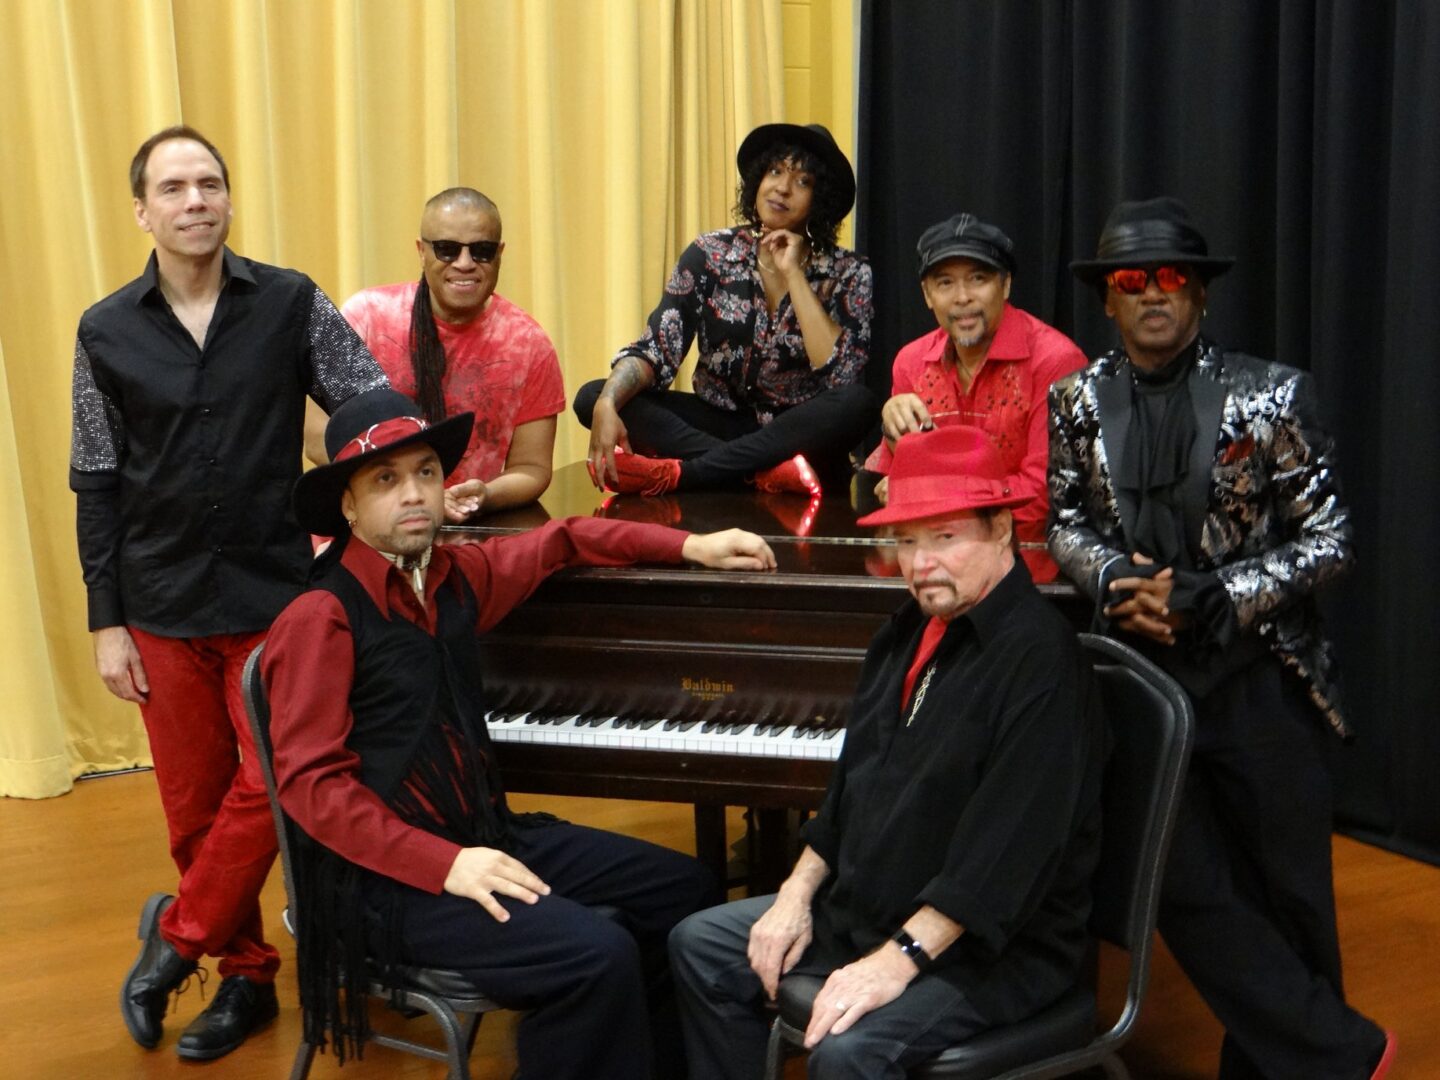 The Family Stone band in red outfits posing near a piano